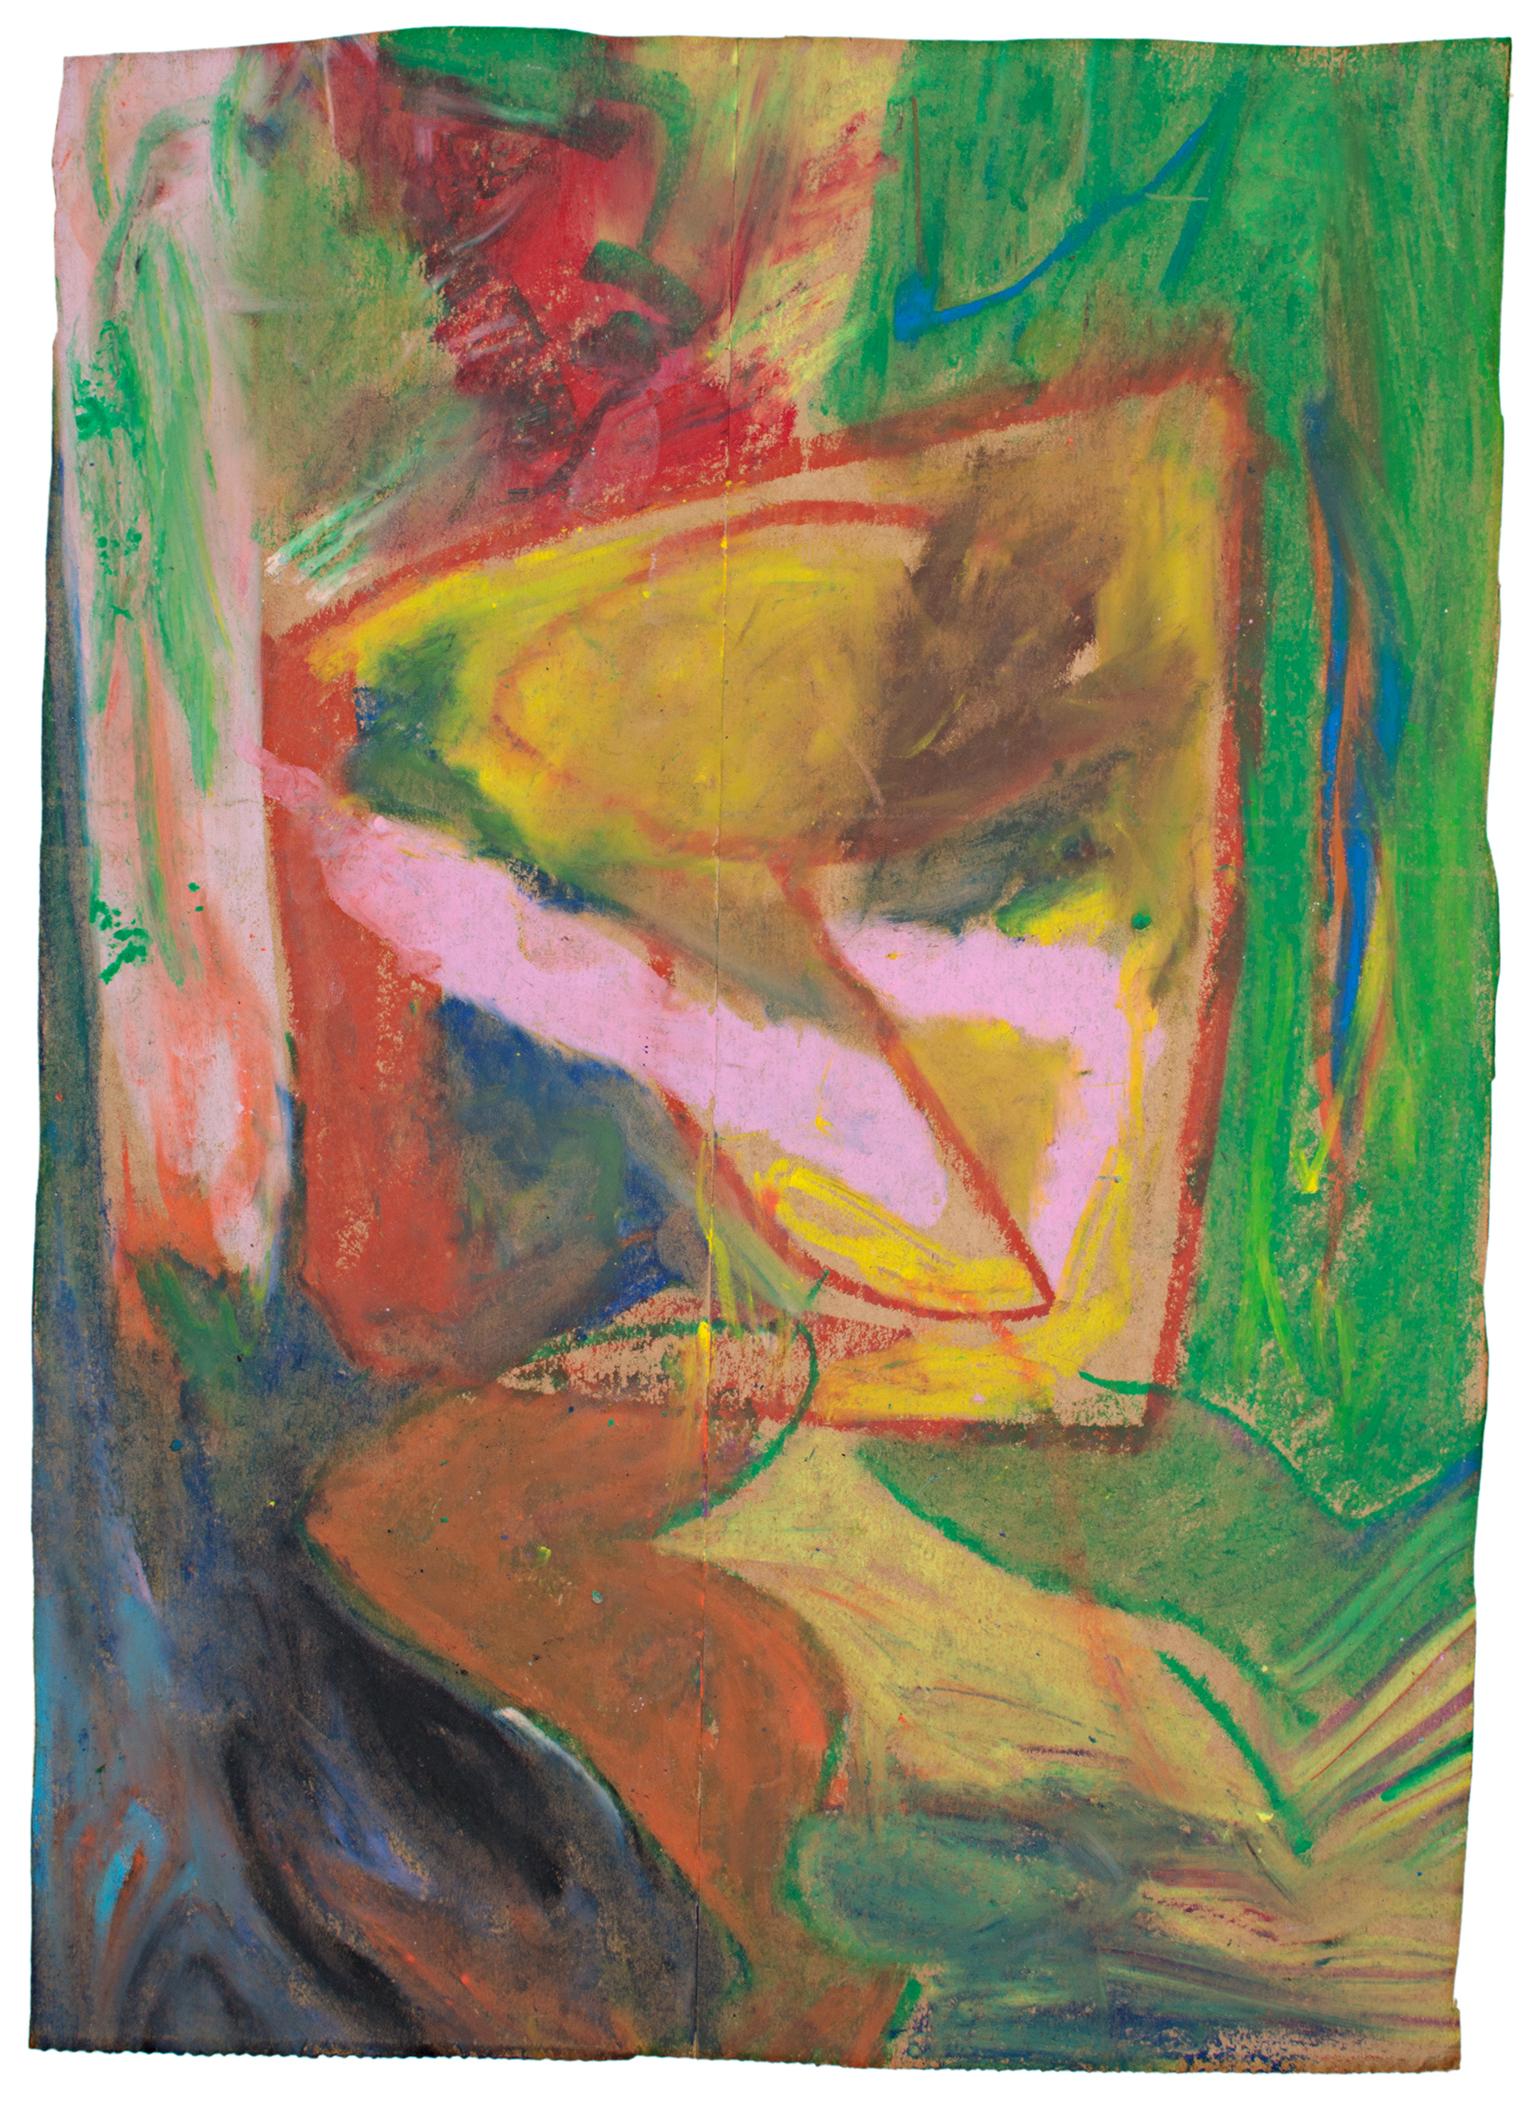 "Confused Abstract" is an original oil pastel on grocery bag by Reginald K. Gee. The artist signed the piece on the back. It features an abstract design in yellow, pink, red, green, and orange. 

16 1/2" x 11 3/4" art
Custom framing is